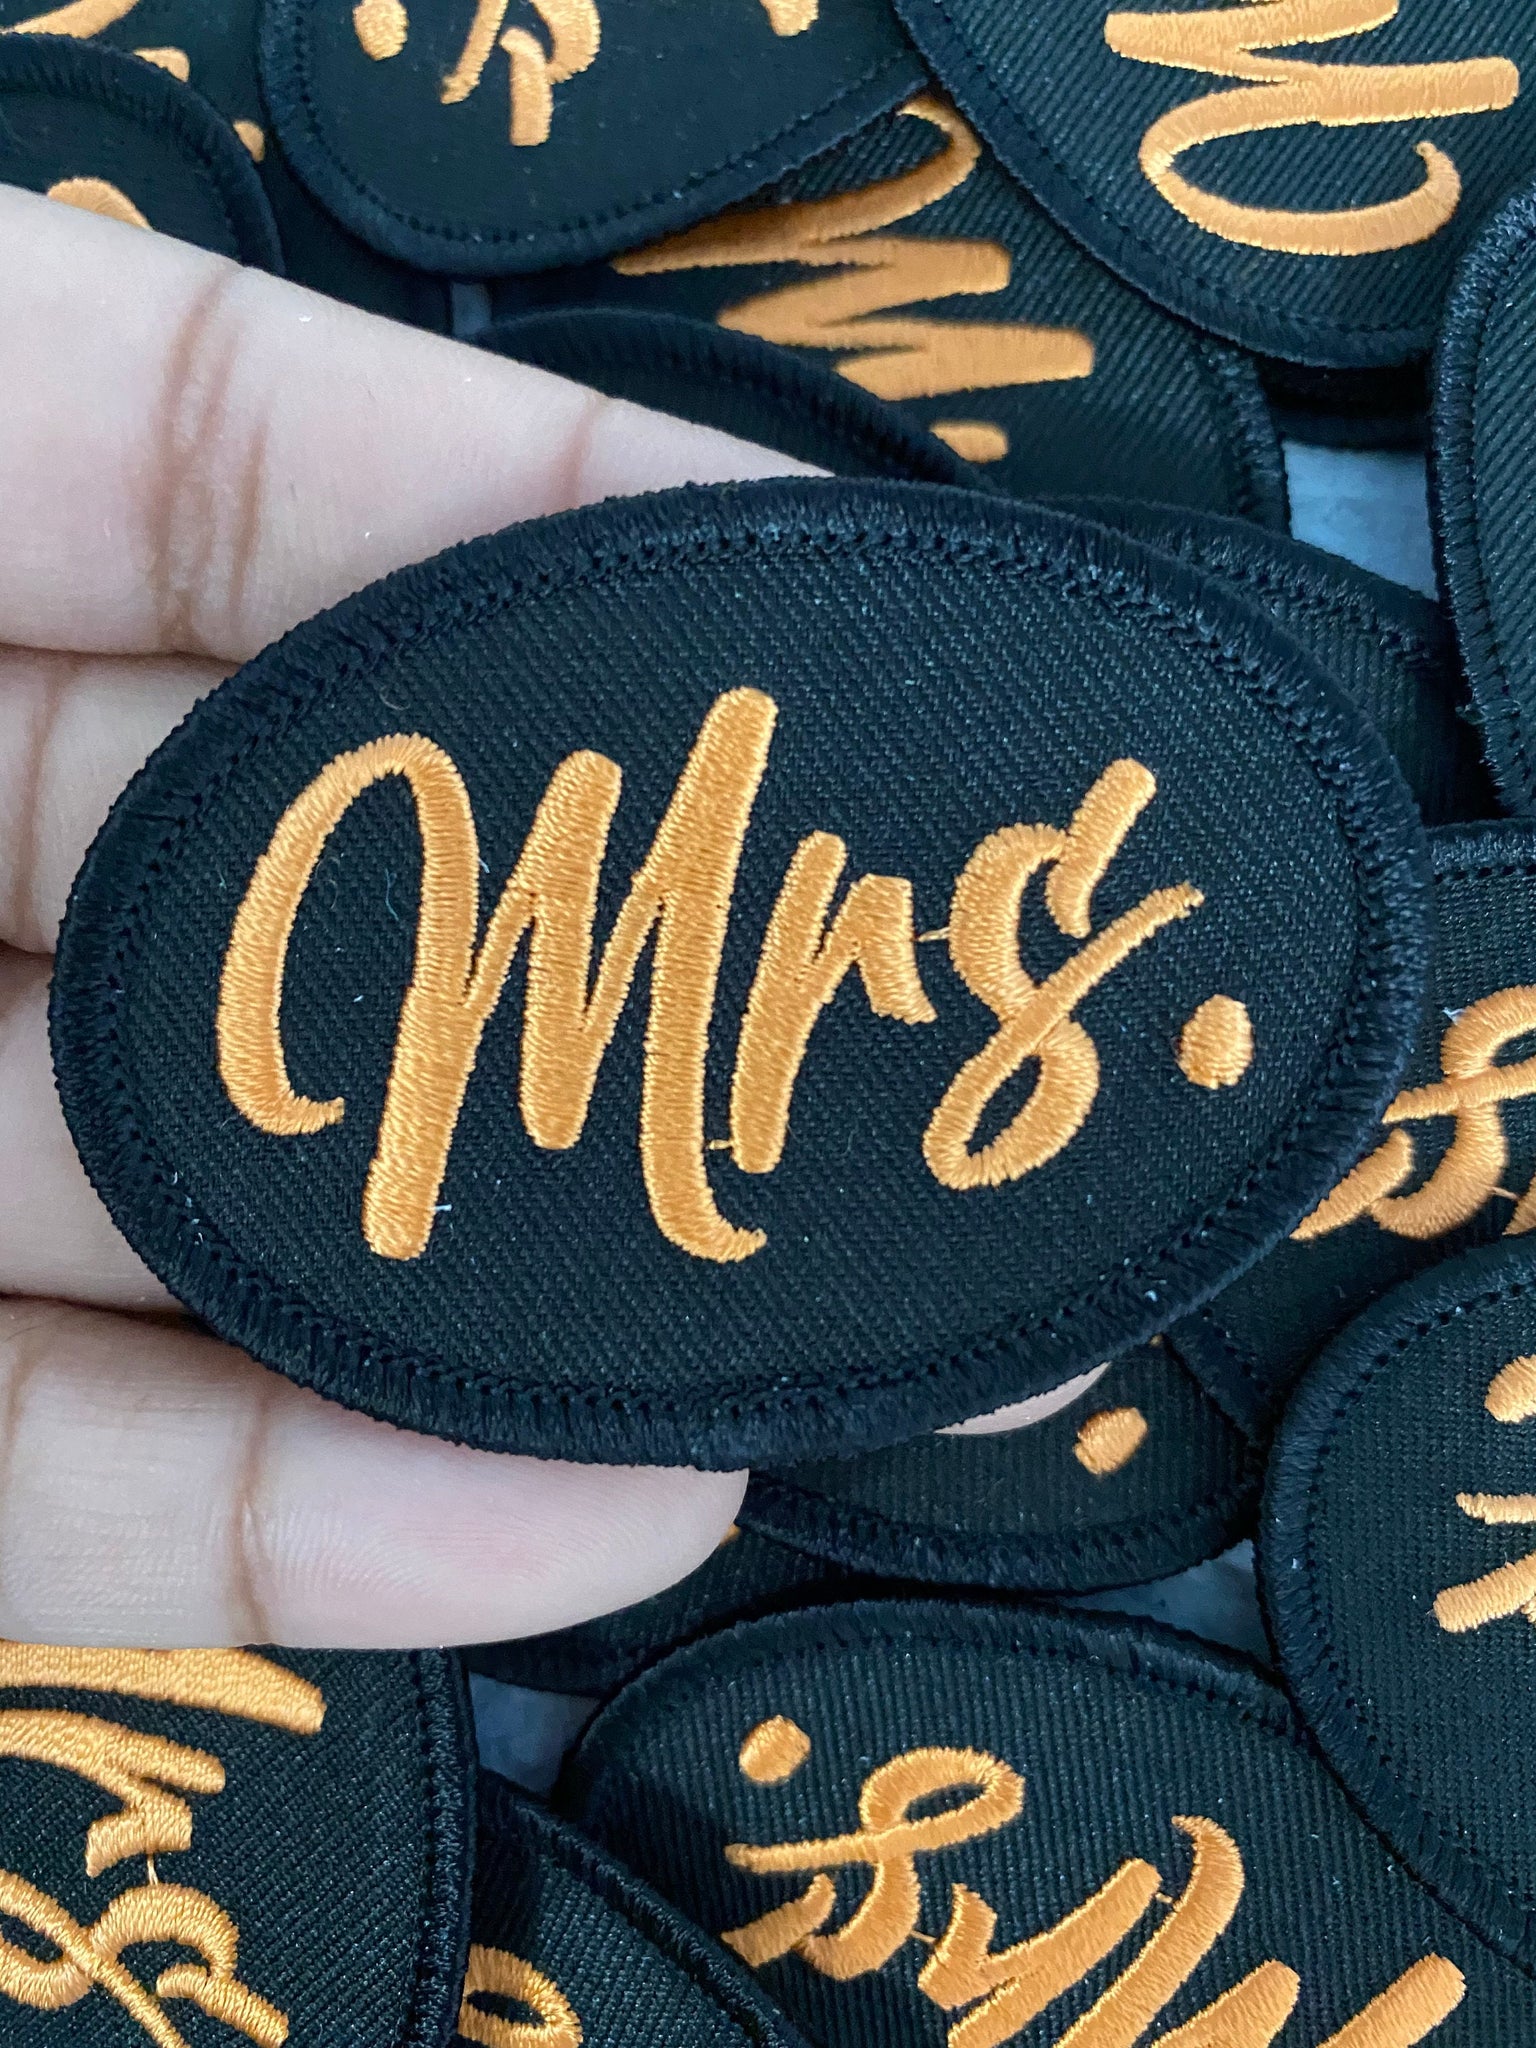 NEW, Exclusive  "Mrs." , embroidered patch, Gift for Wives, Great for women, patch applique, Size 2.5"